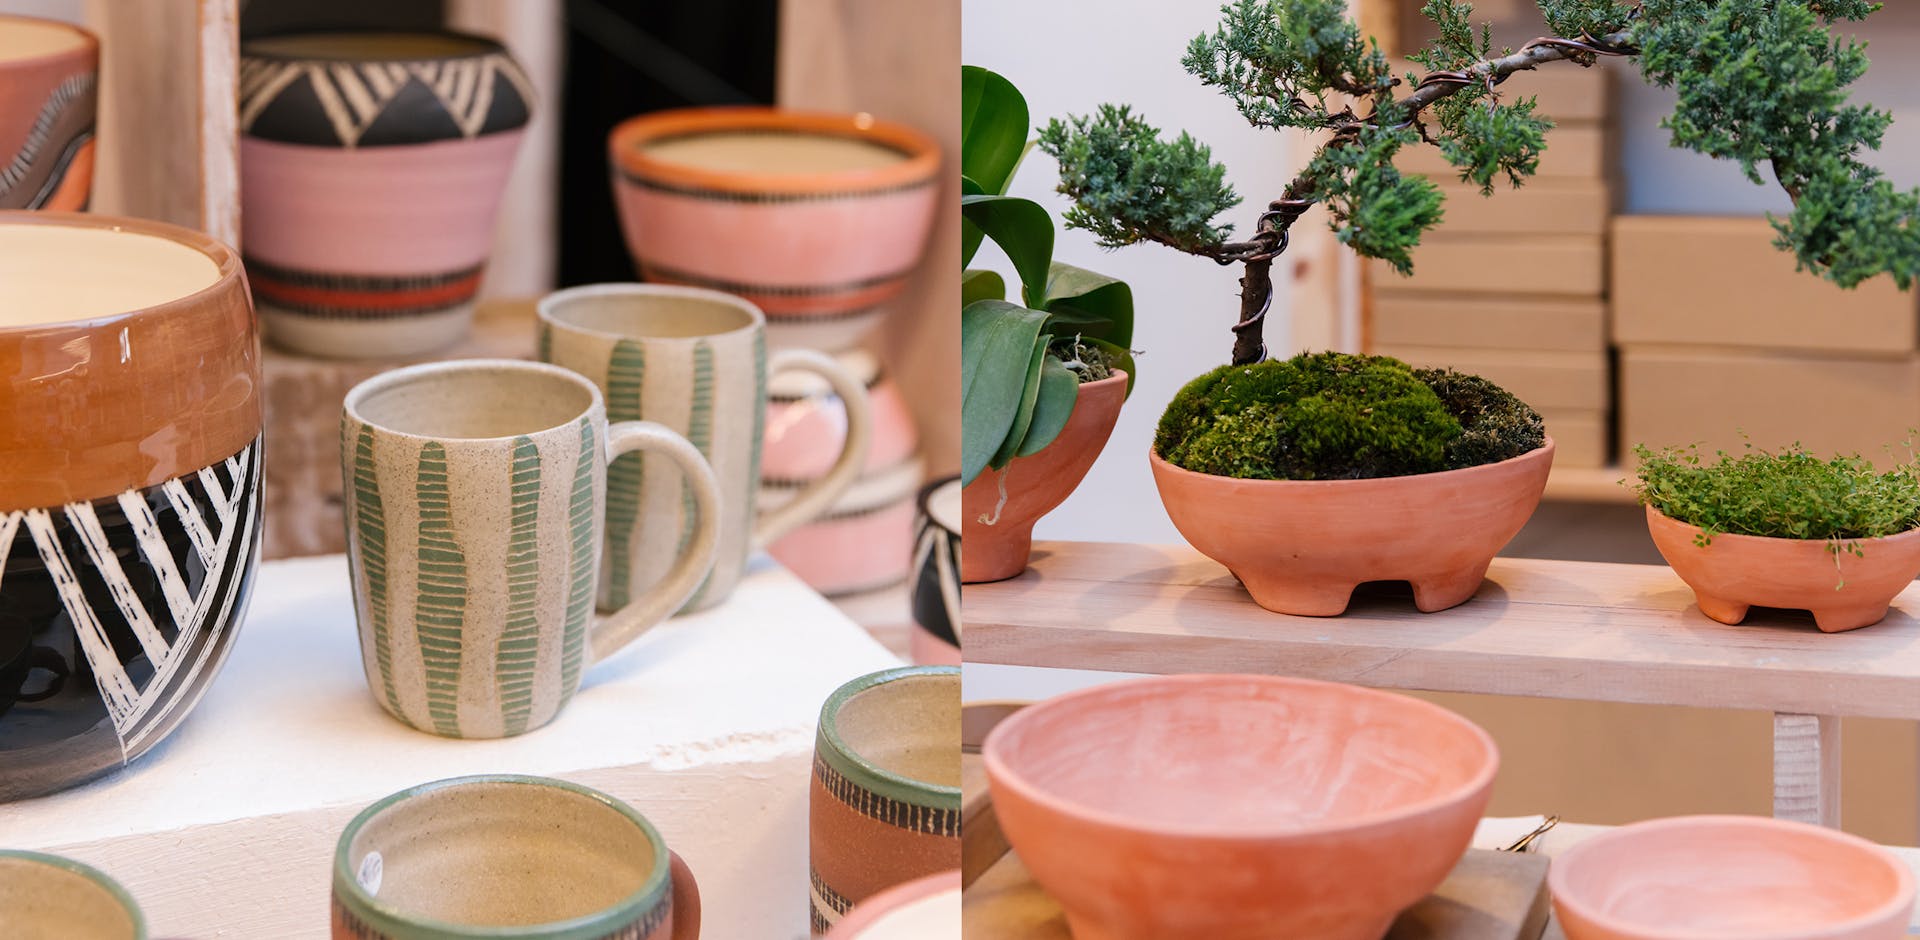 Ceramic mugs with scraffito illustration surrounded by colourful pots and vases, all by Sydney ceramicist Trade the Mark, photo: Samee Lapham. Handmade terracotta ceramic planters by Sydney ceramicist Mennt, photo: Samee Lapham.